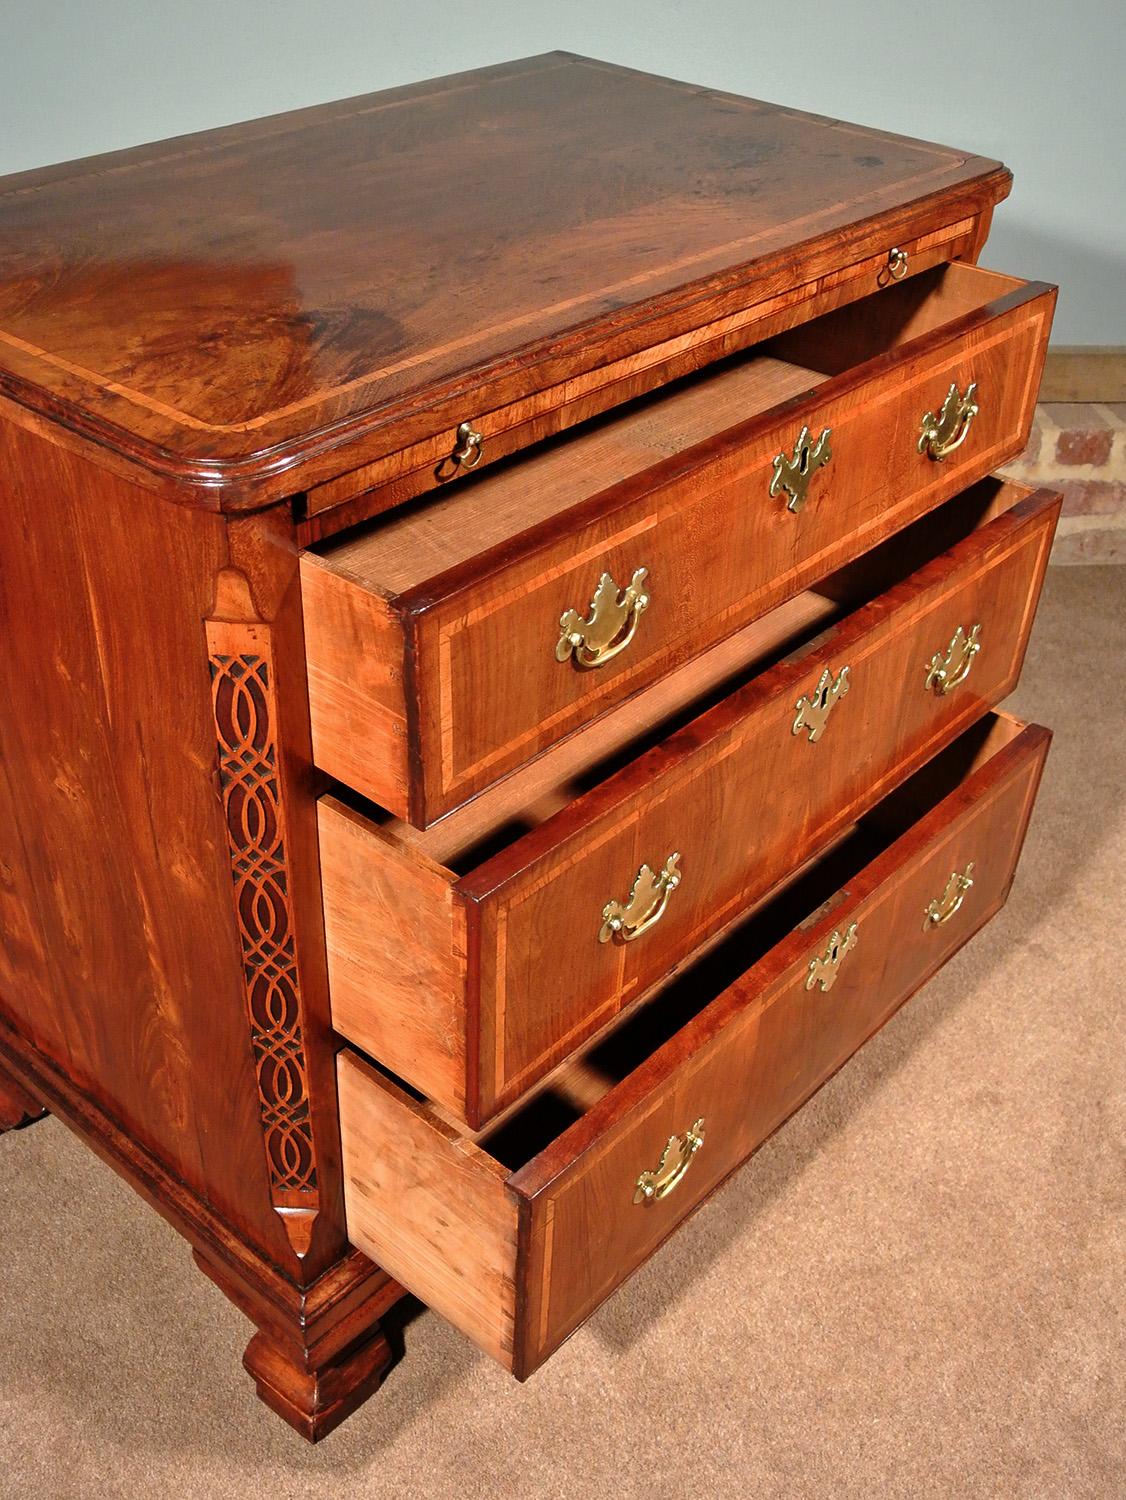 Mid-18th Century Small and Fine George II Yew Wood Batchelors Chest of Drawers, circa 1750 For Sale